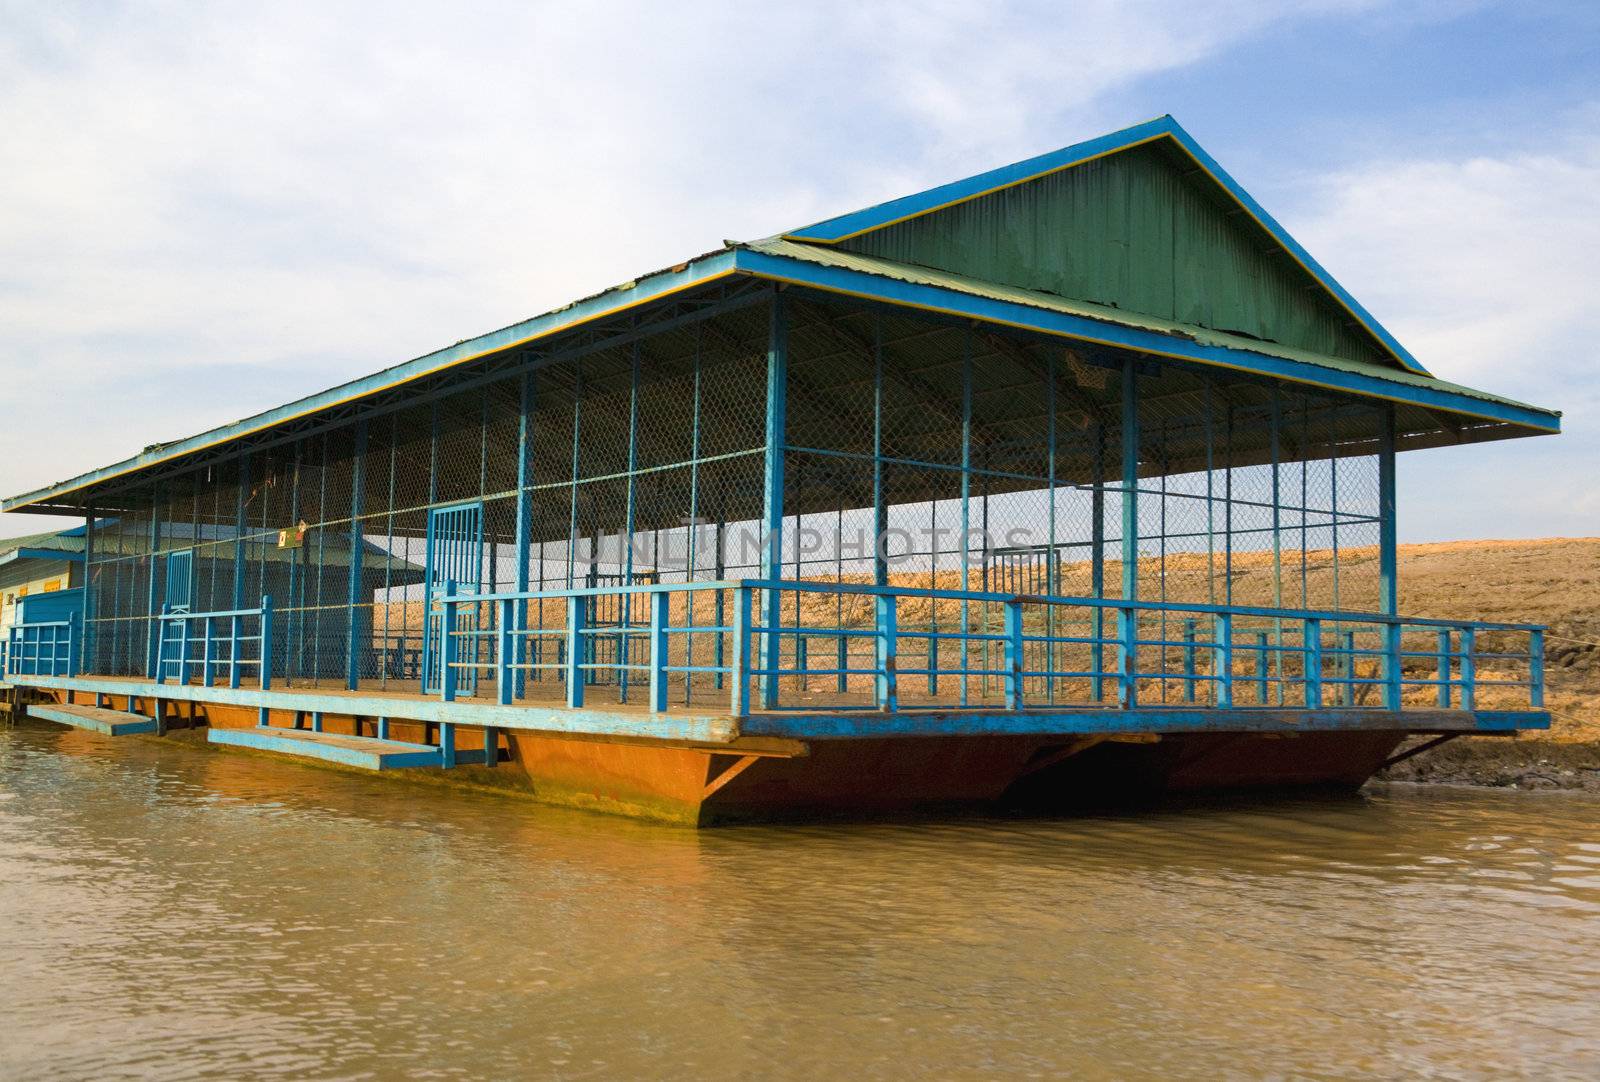 Chong Kneas Floating Basketball Court, Cambodia by shariffc